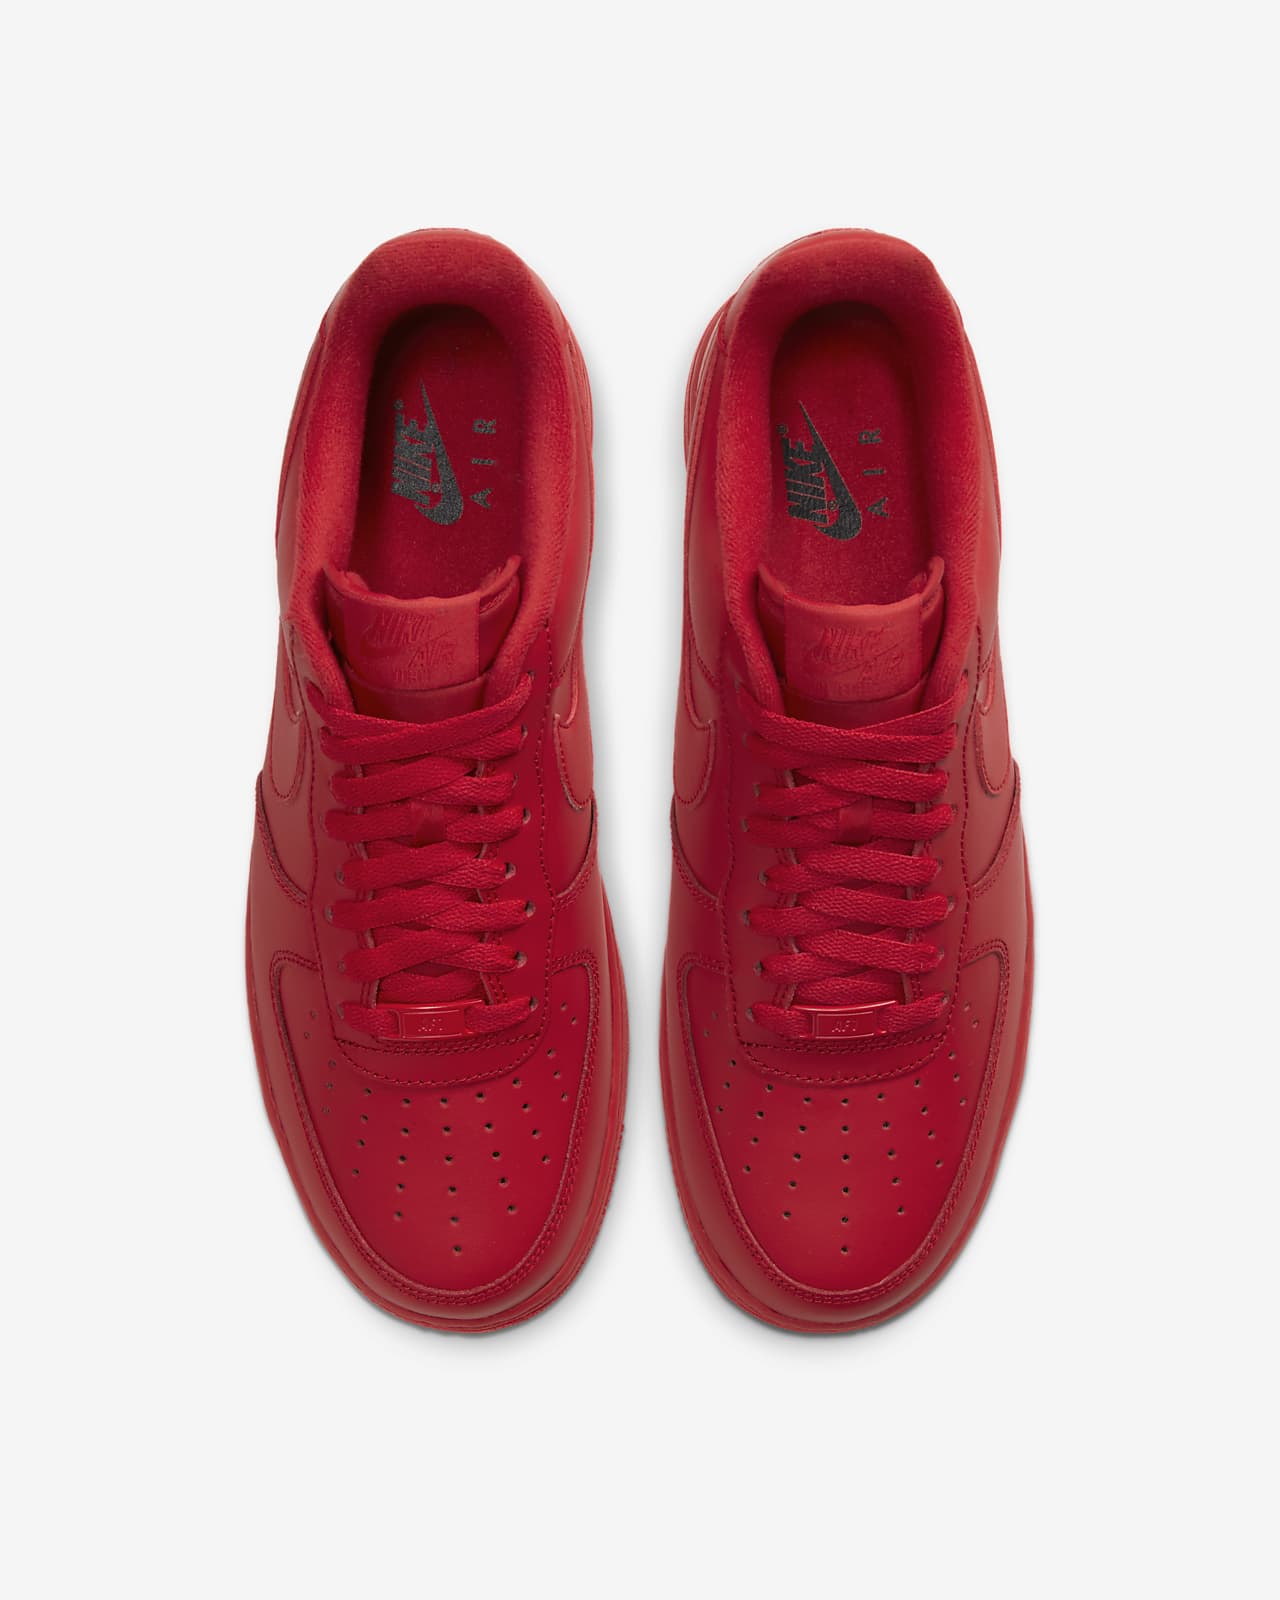 mens all red air force 1